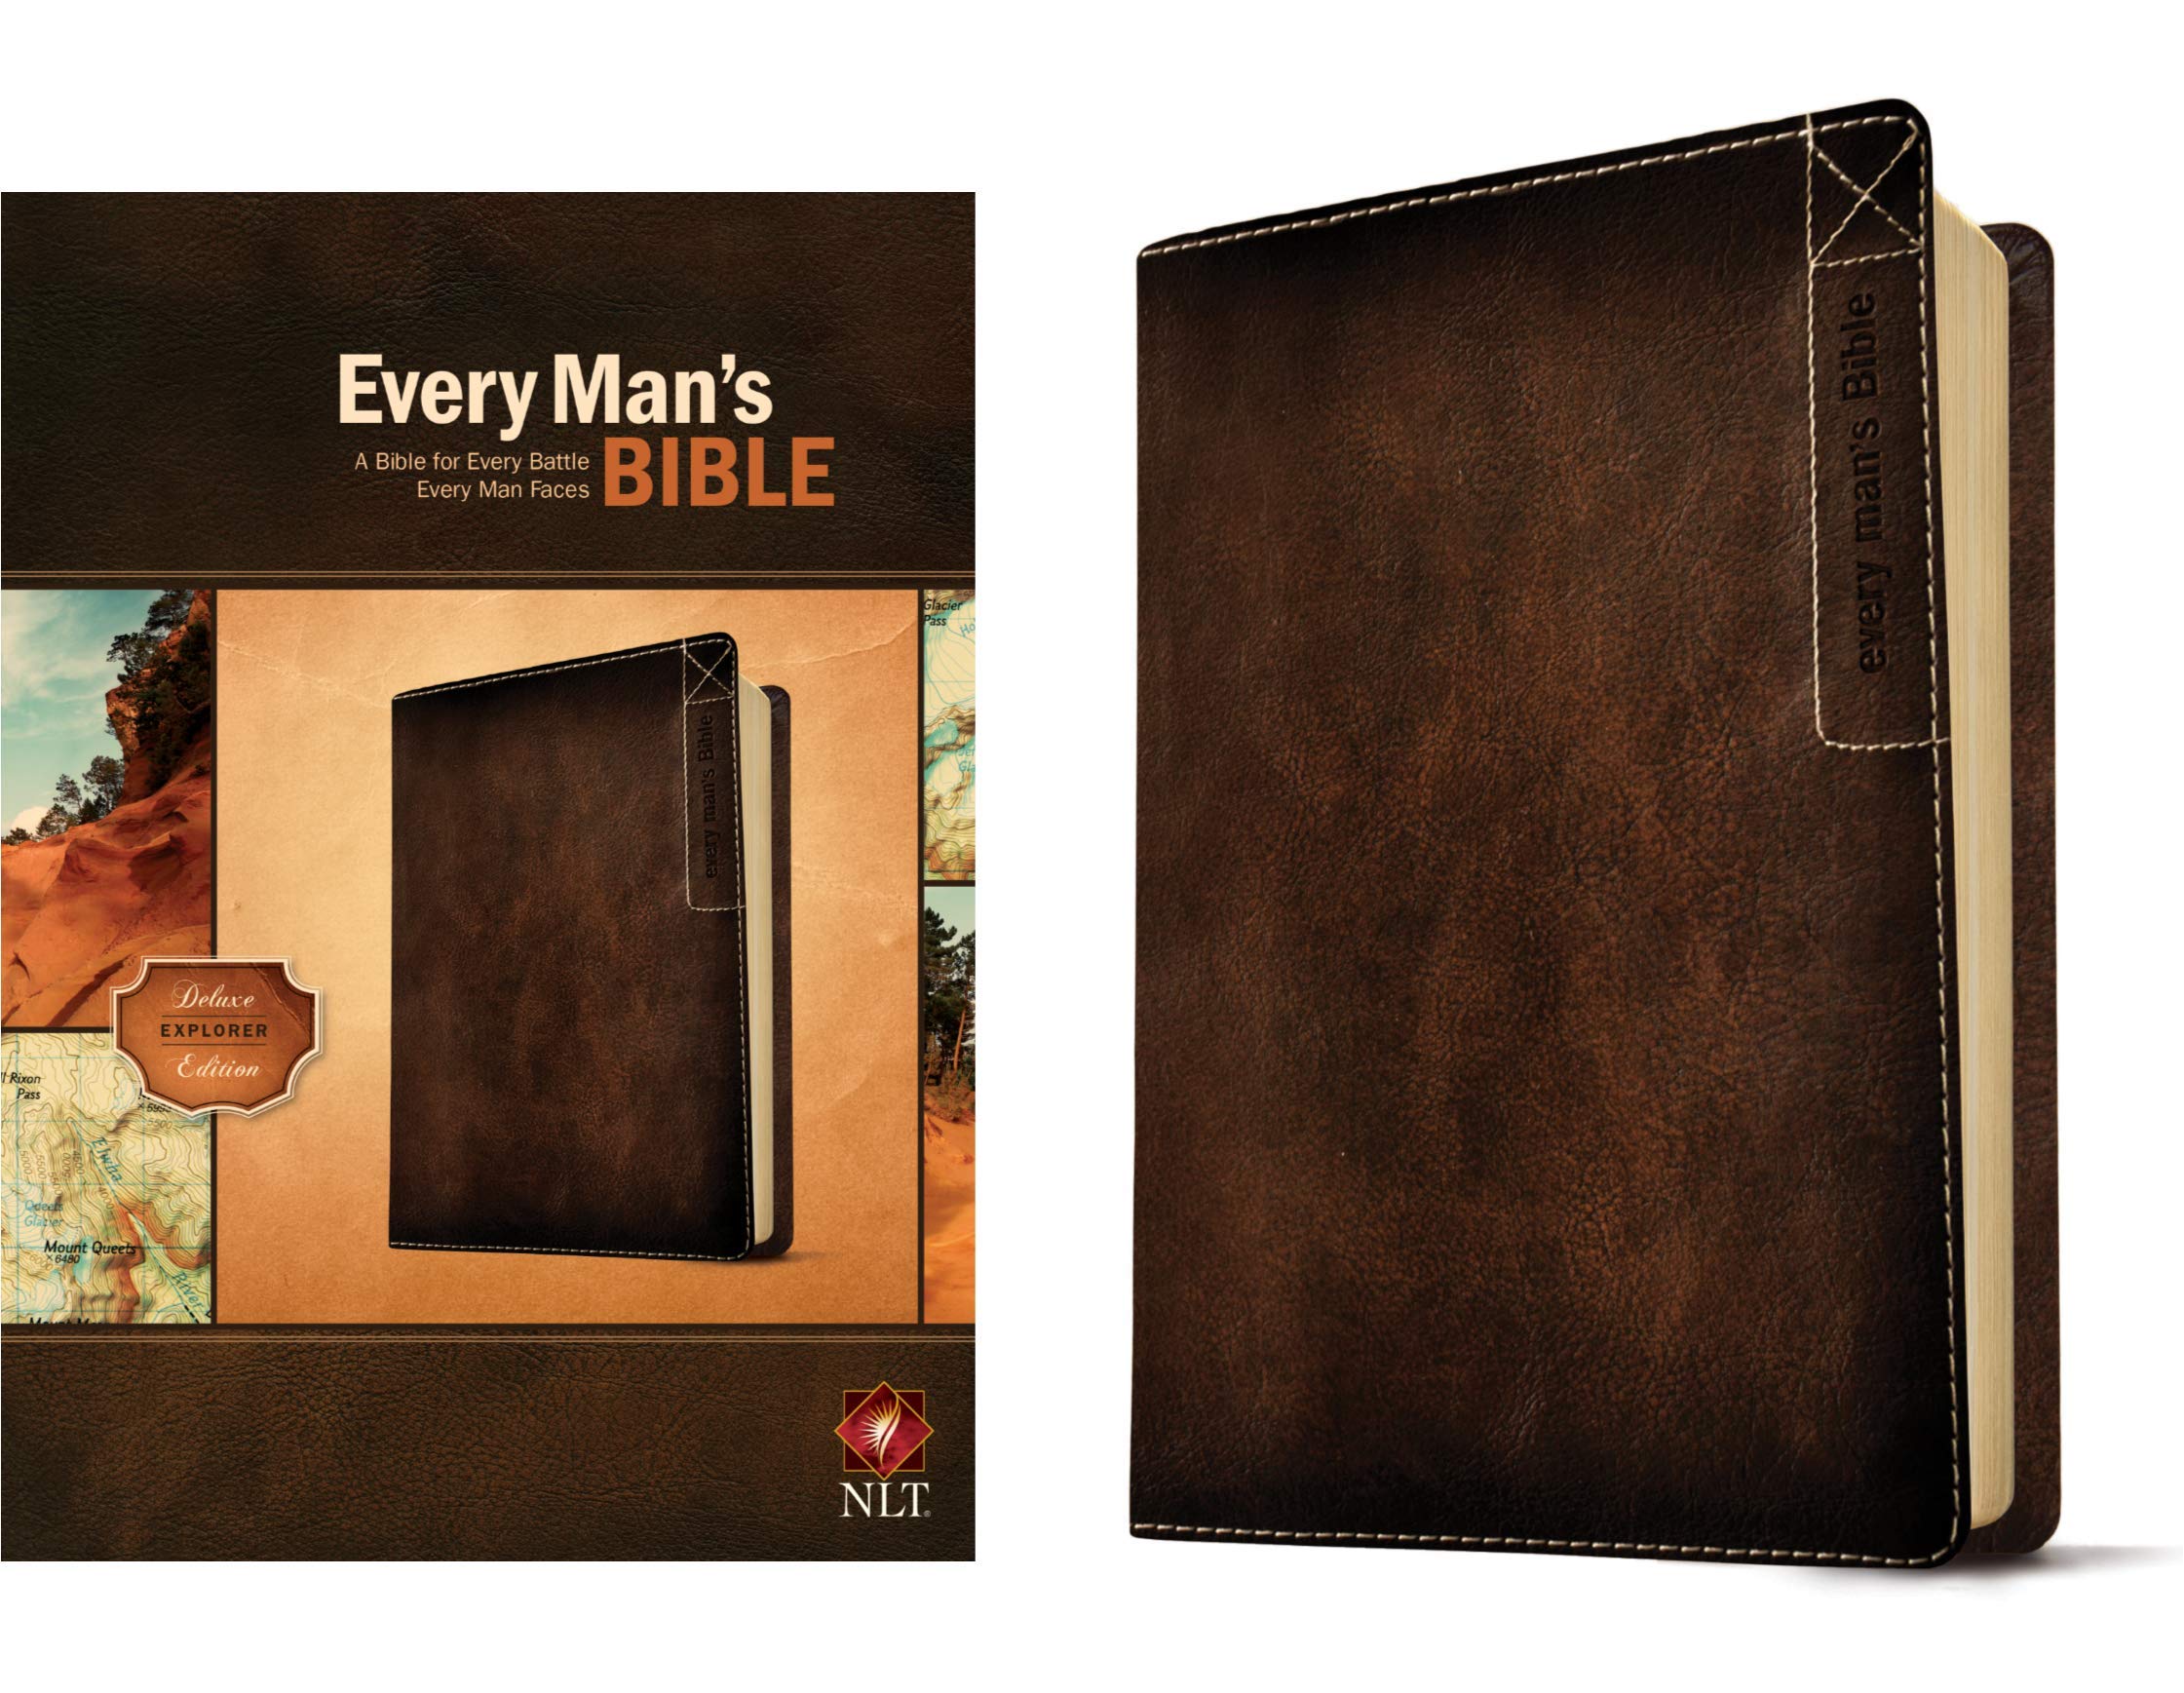 Every Man's Bible: New Living Translation, Deluxe Explorer Edition (LeatherLike, Brown) – Study Bible for Men with Study Notes, Book Introductions, and 44 Charts